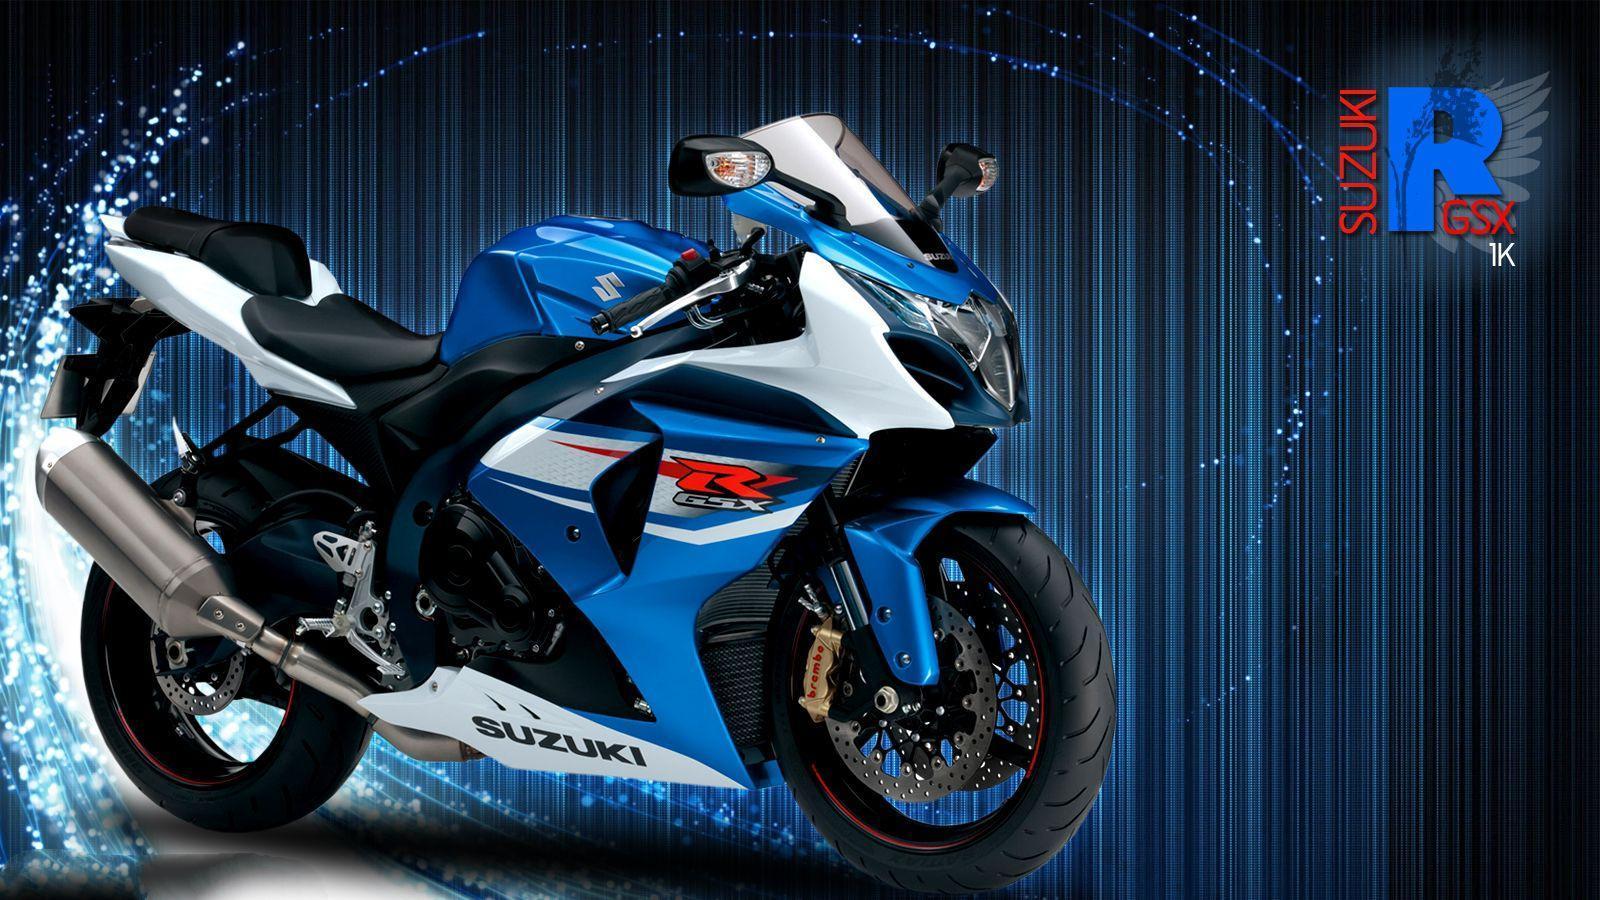 Tons of awesome suzuki gsxr 1000 2016 wallpapers to download for free. 